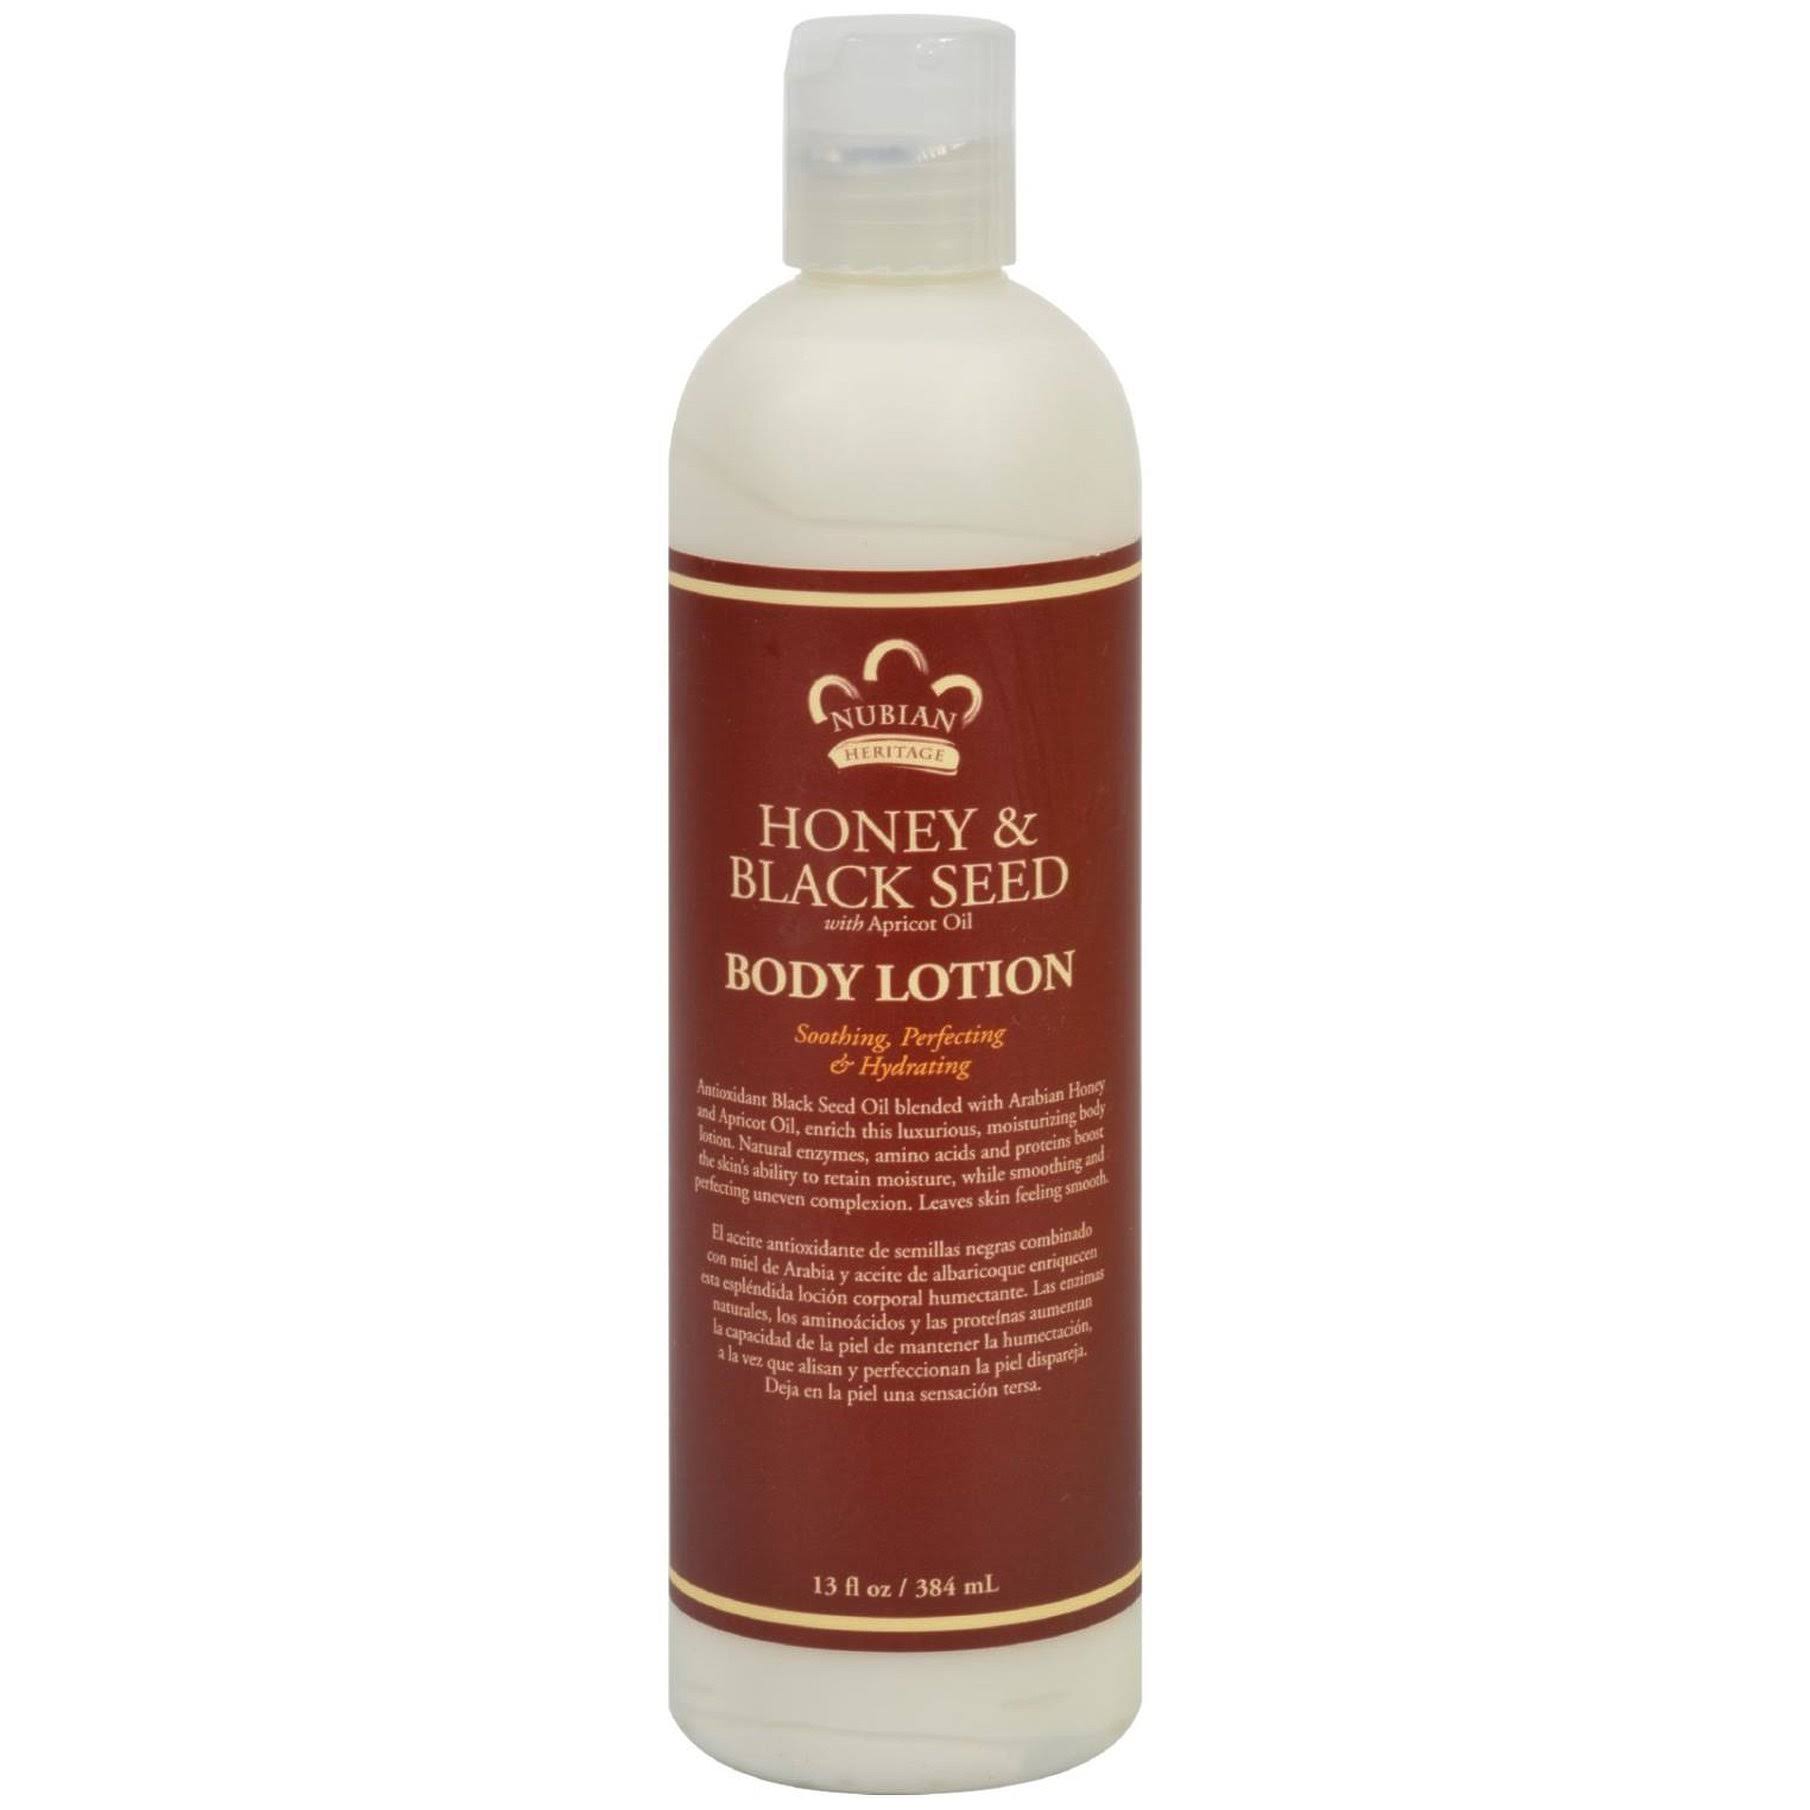 Nubian Heritage Honey & Black Seed with Apricot Oil Body Lotion - 13oz